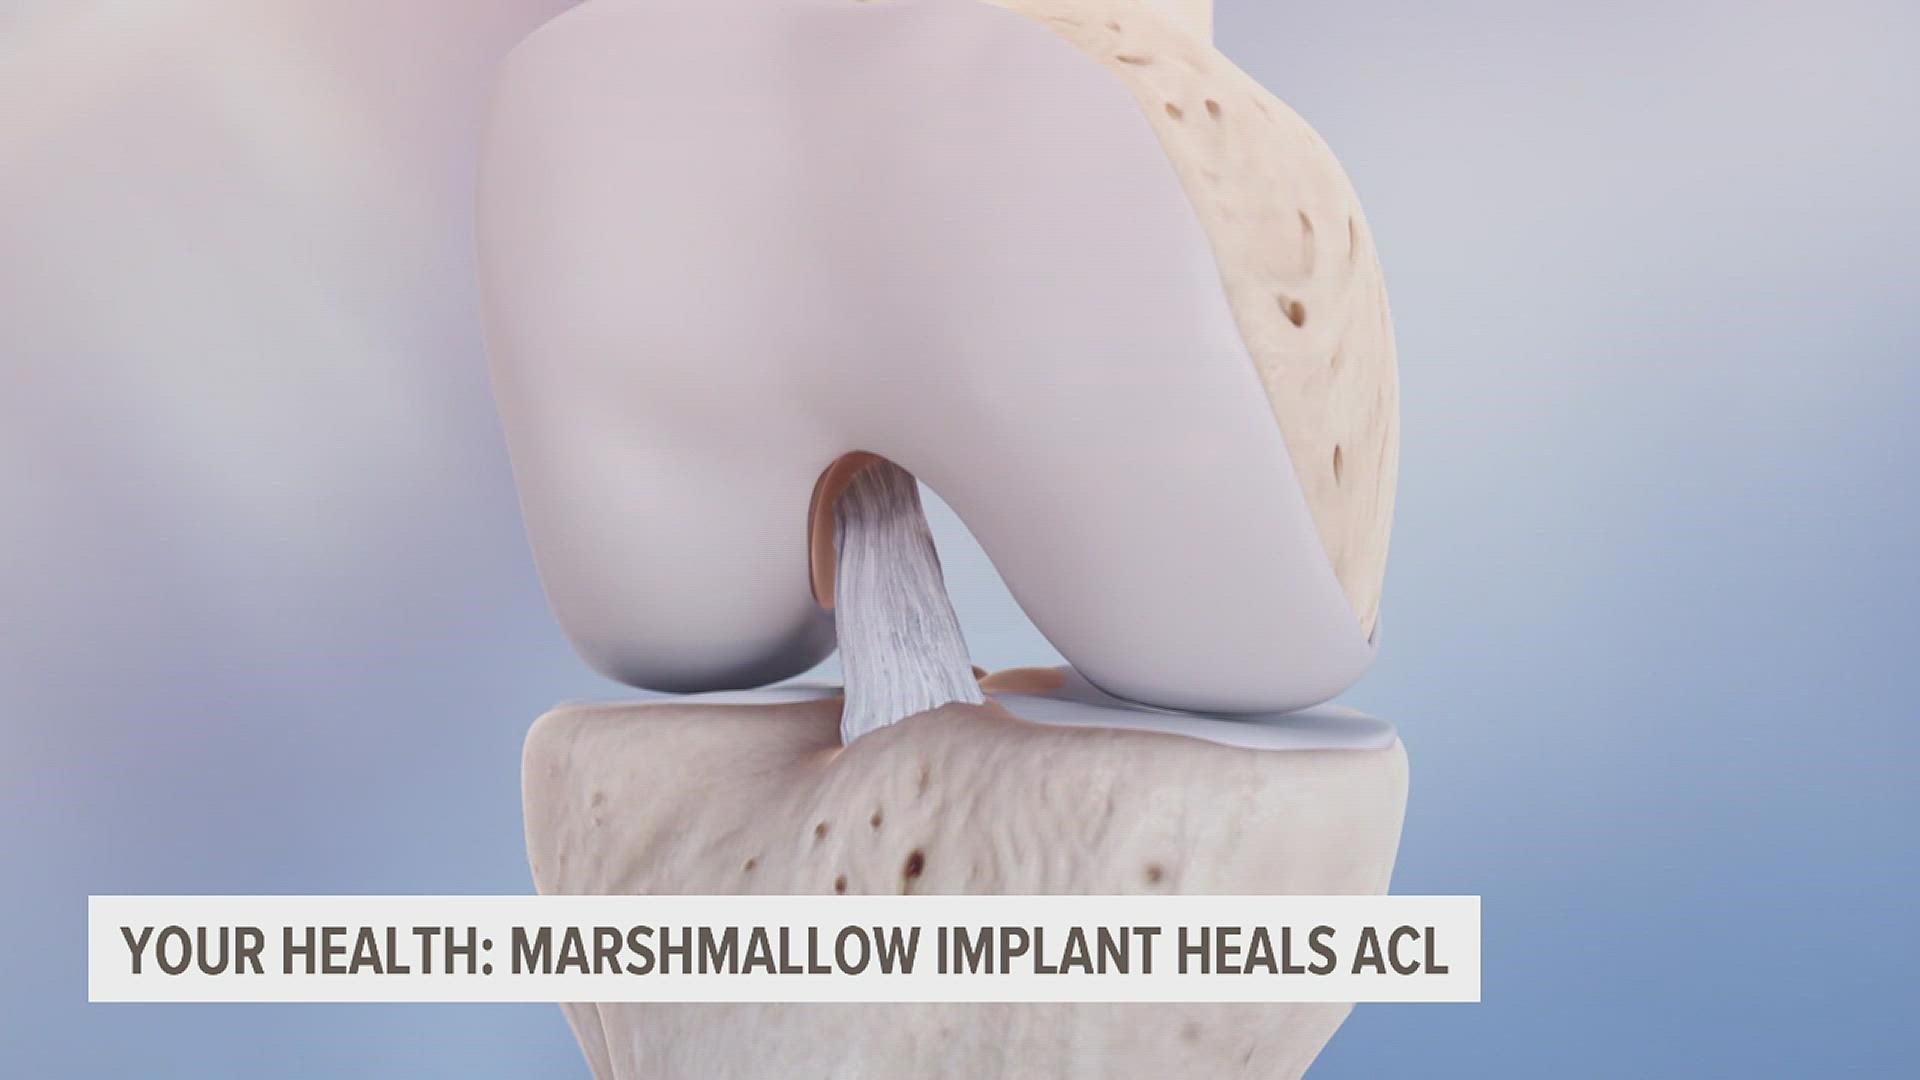 Nearly 200,000 ACL reconstruction surgeries are performed in the U.S. each year, and now, there’s a new less invasive treatment option.